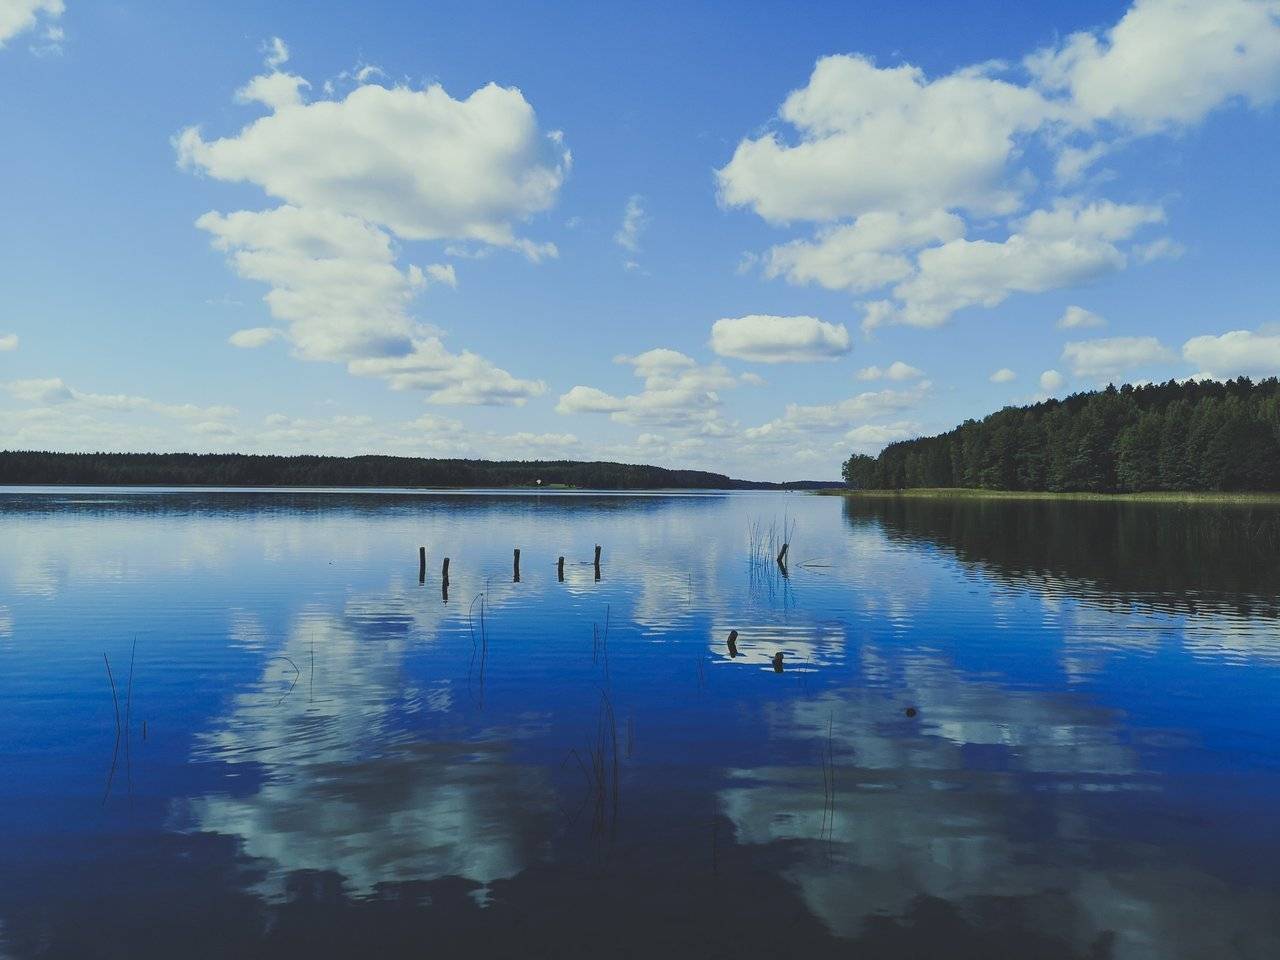   White Lakajai Lake in Labanoras Regional Park, Lithuania. Photo Alis Monte [CC BY-SA 4.0], via Connecting the Dots